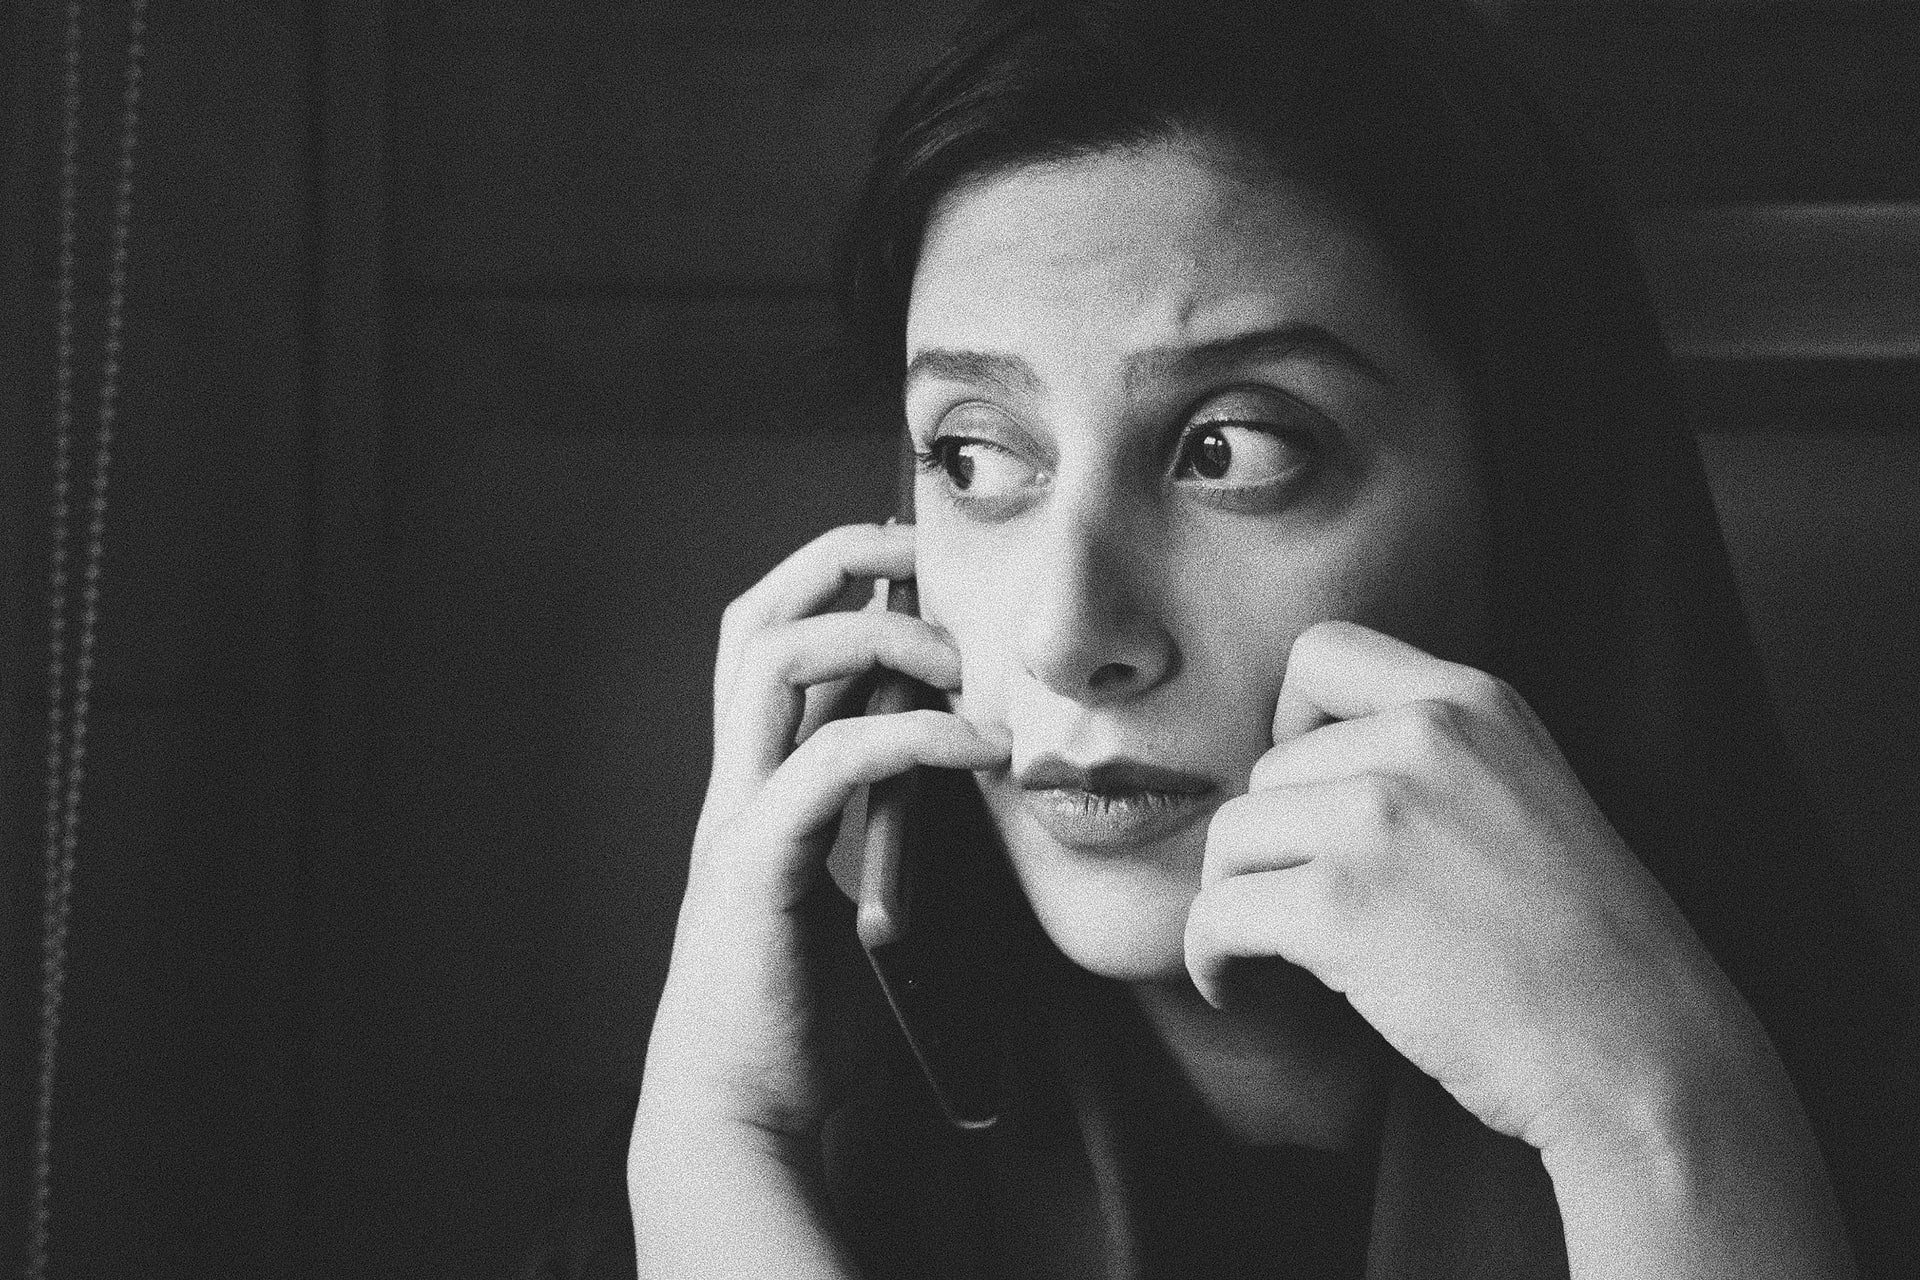 A concerned woman on the phone | Source: Unsplash